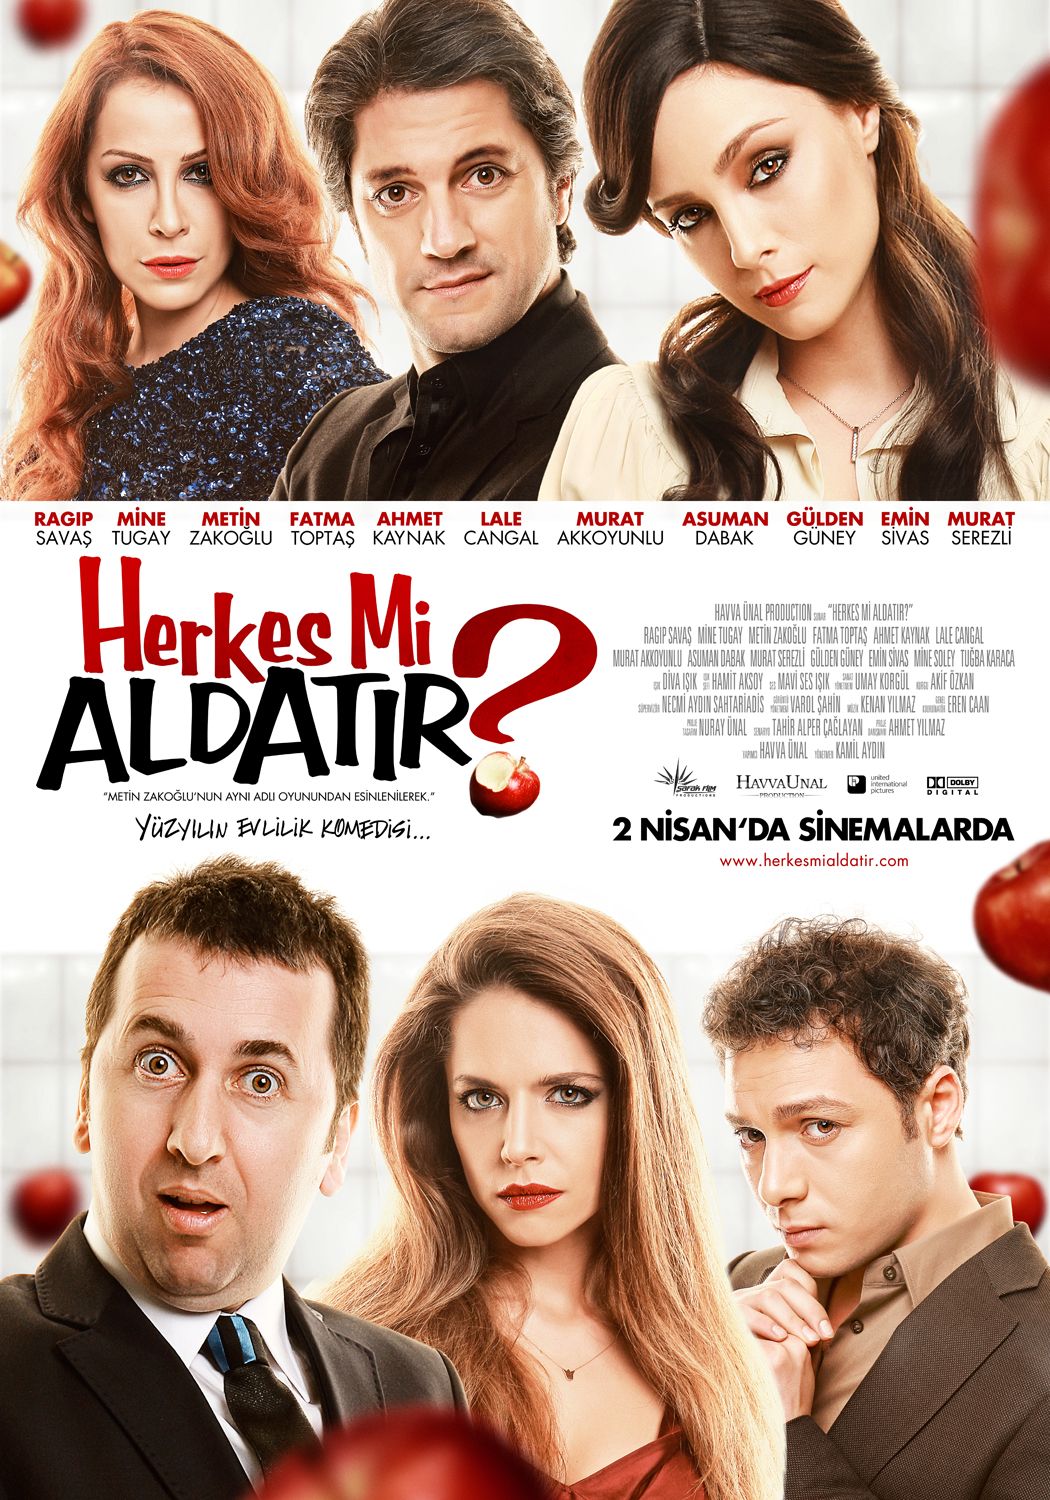 Extra Large Movie Poster Image for Herkes mi Aldat?r? (#3 of 3)